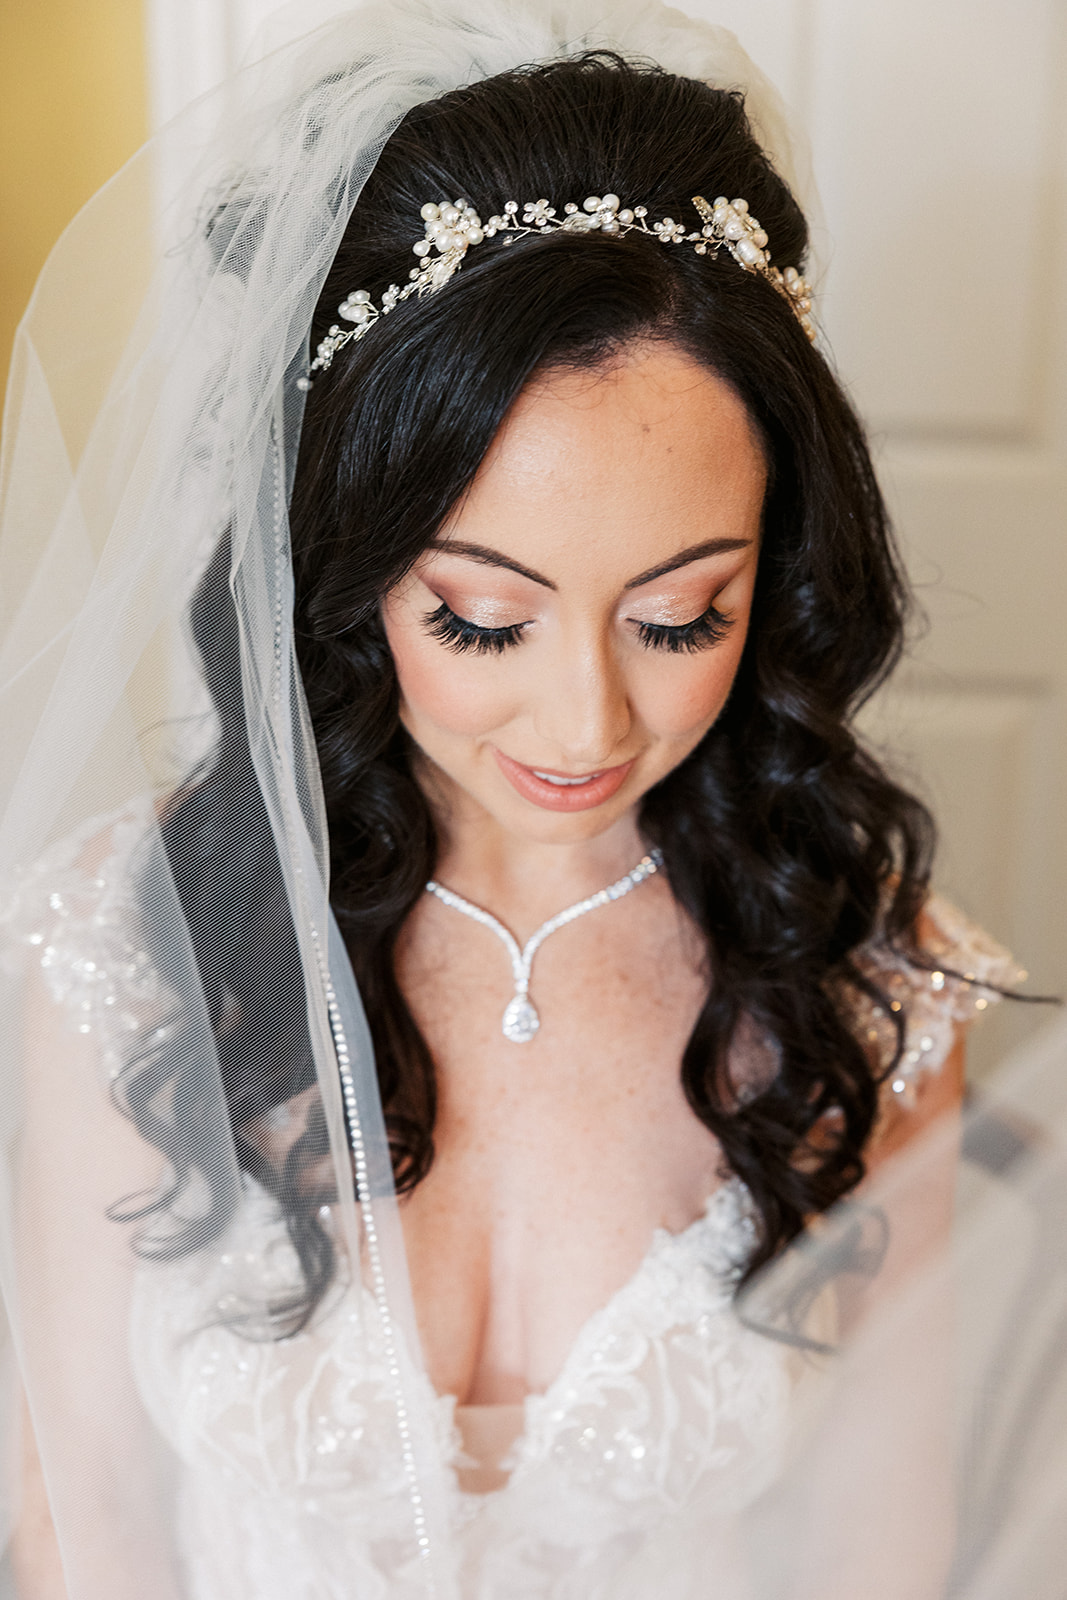 A bride gazes down at her lace dress while surrounded by her veil